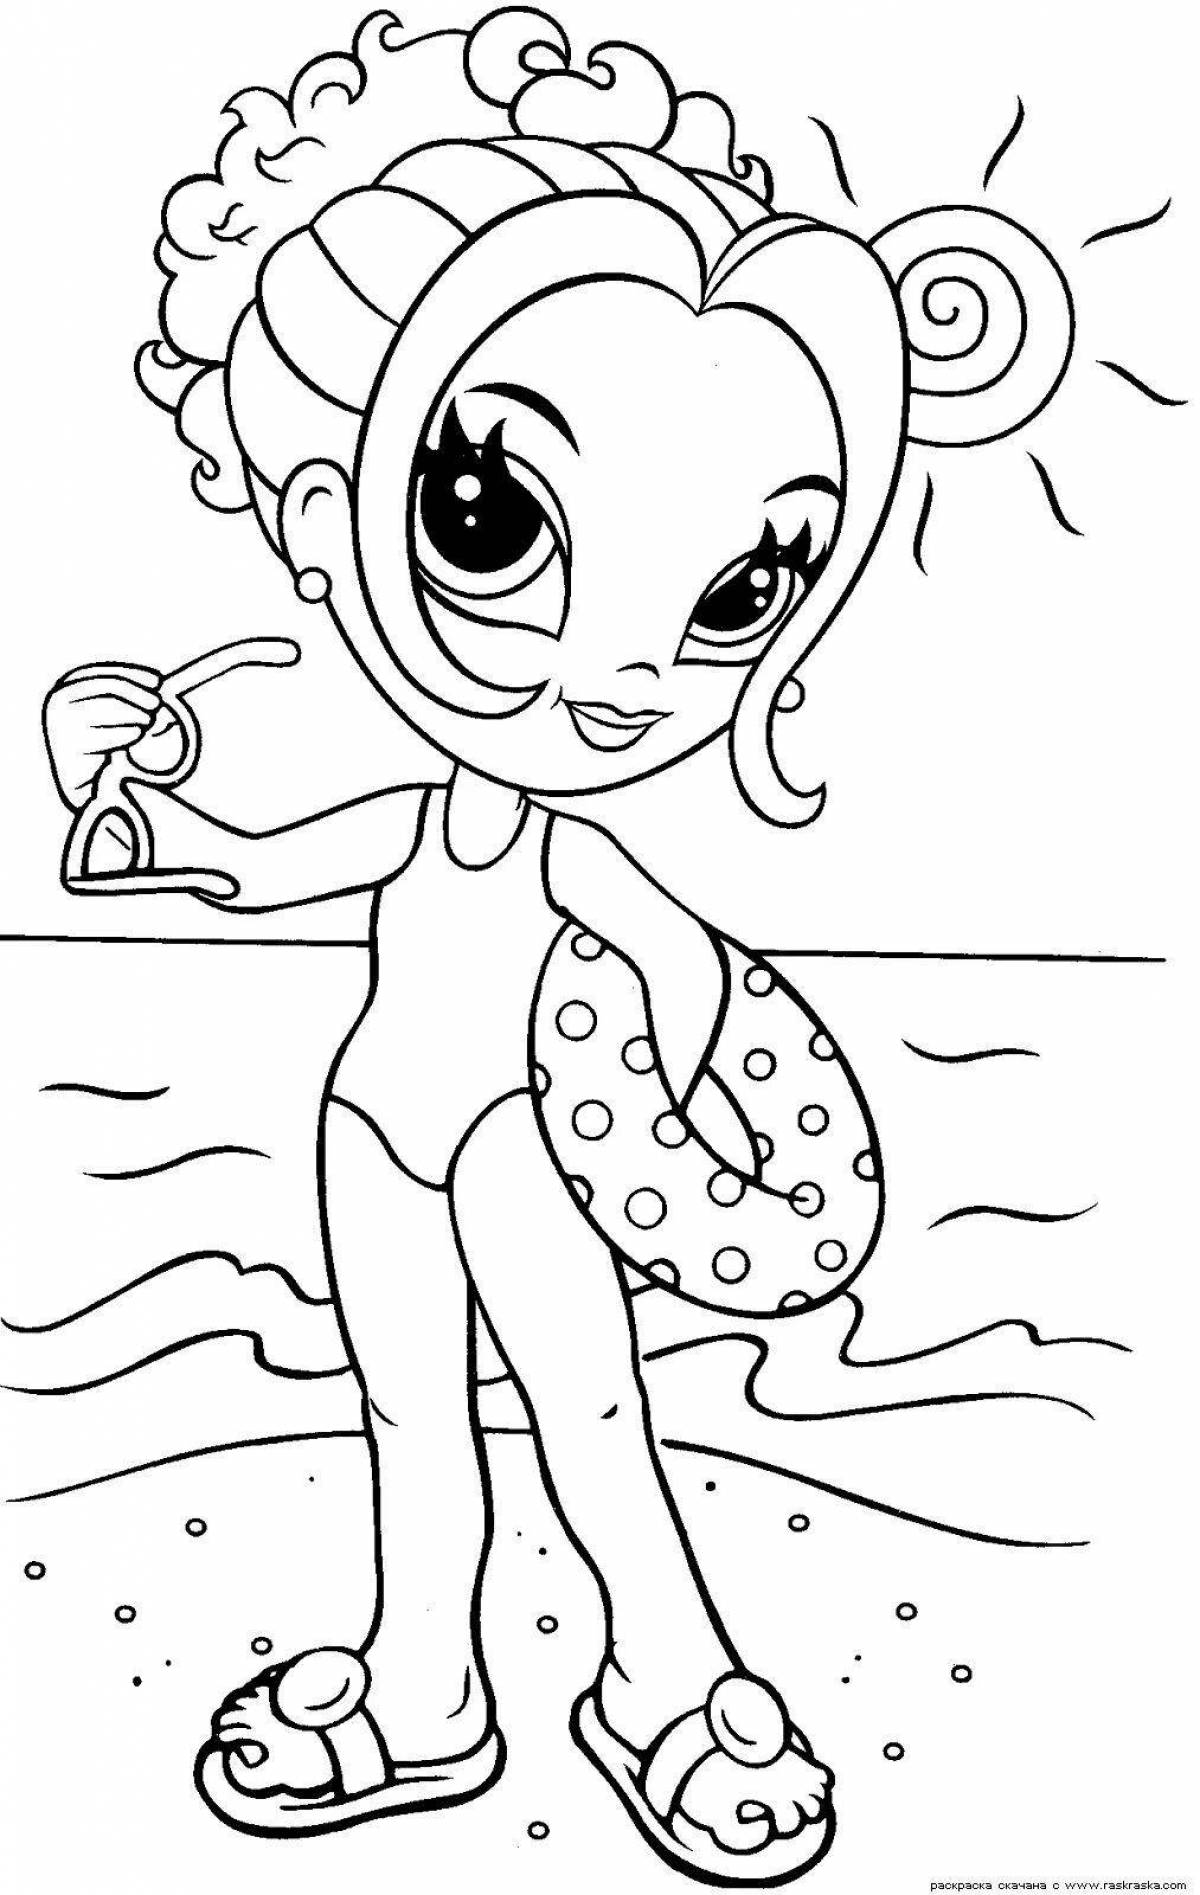 Violent coloring page 7 for girls